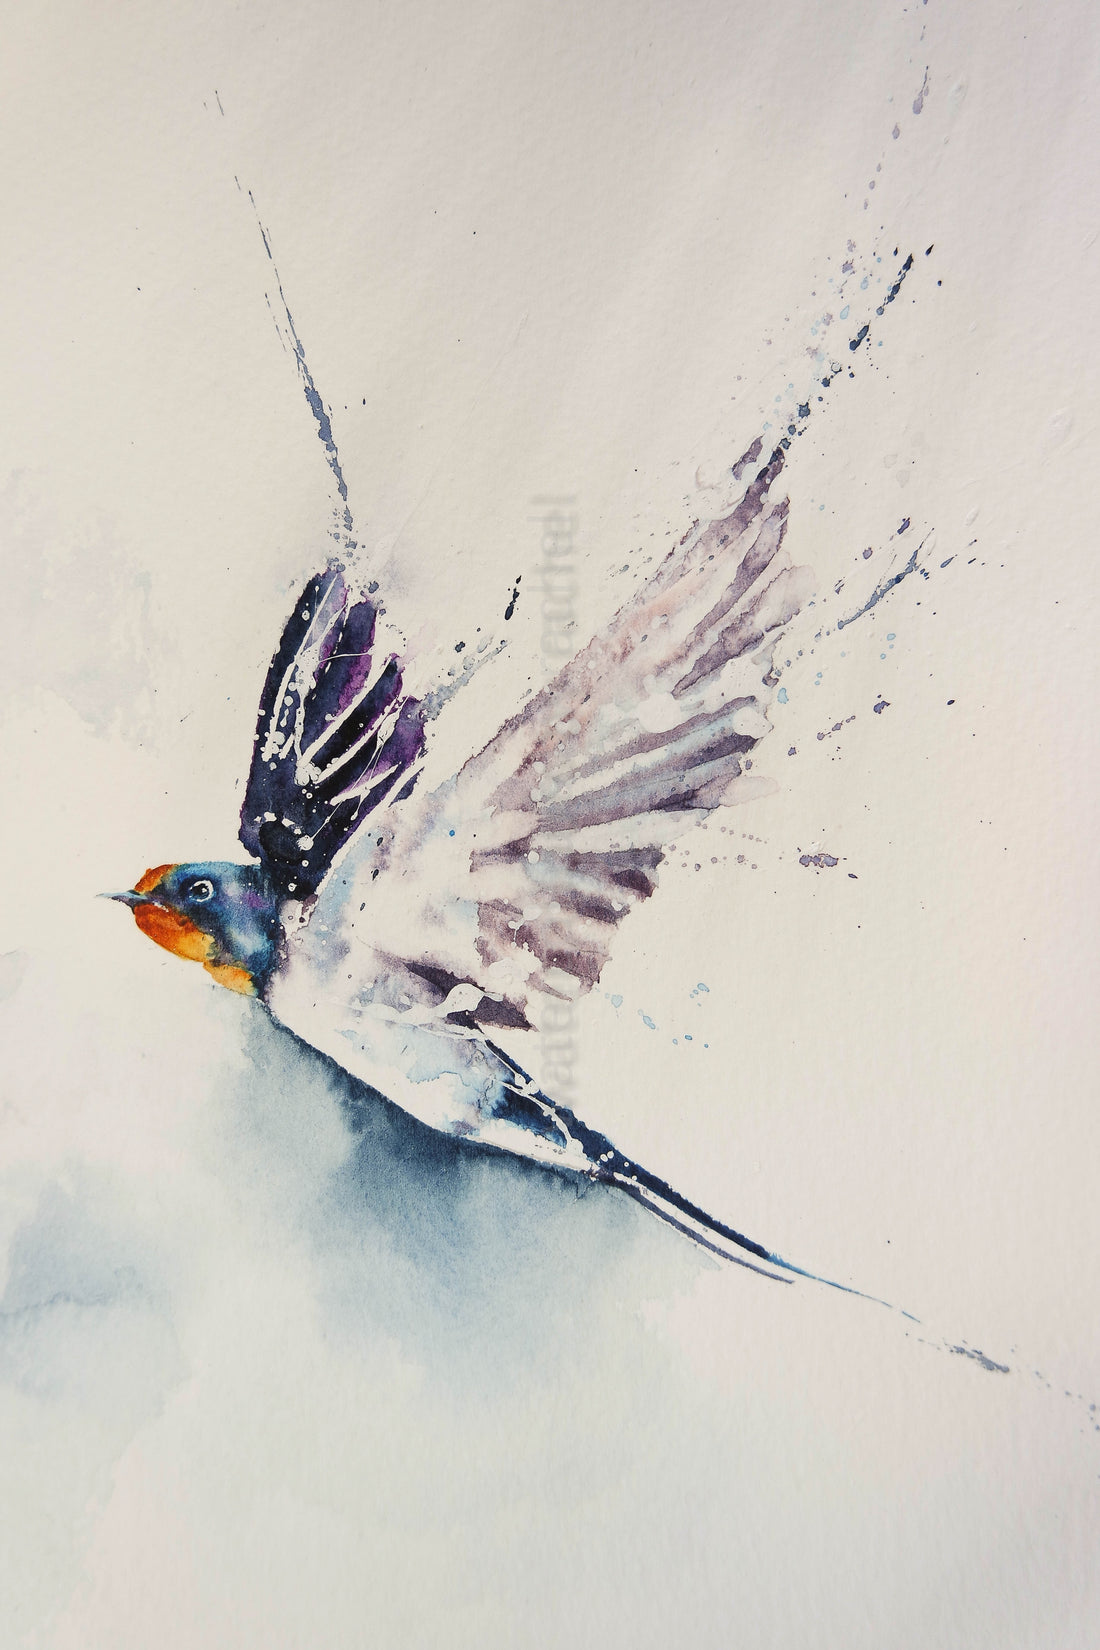 Painting a swallow